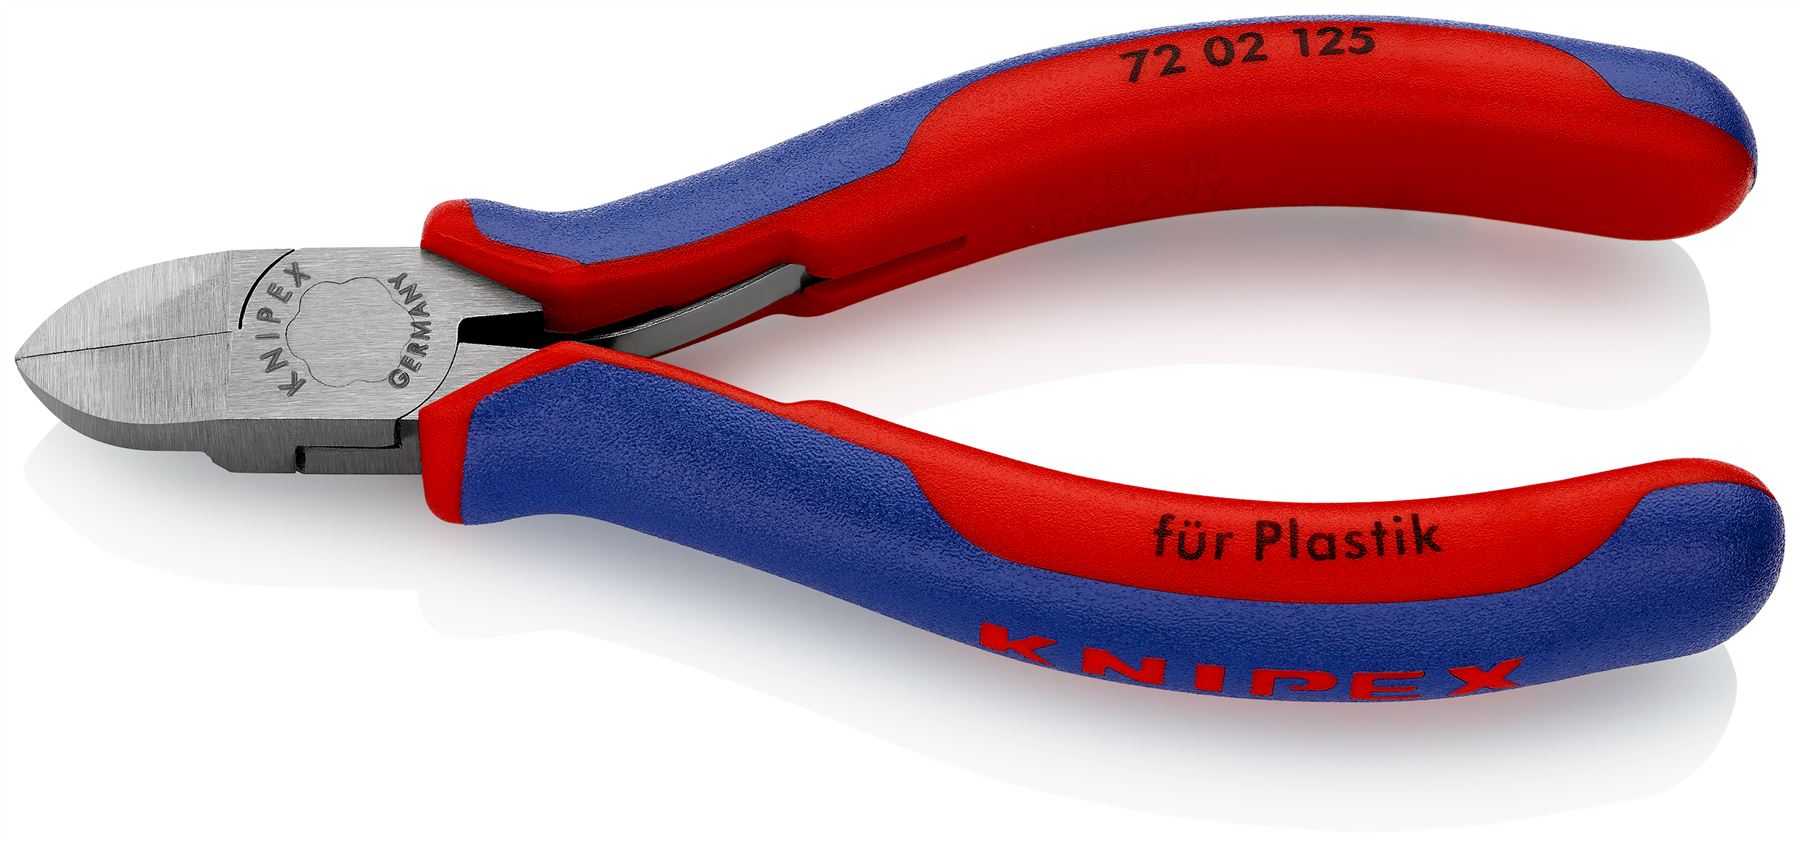 Knipex Diagonal Side Cutters for Plastics 125mm Multi Component Grips 72 02 125